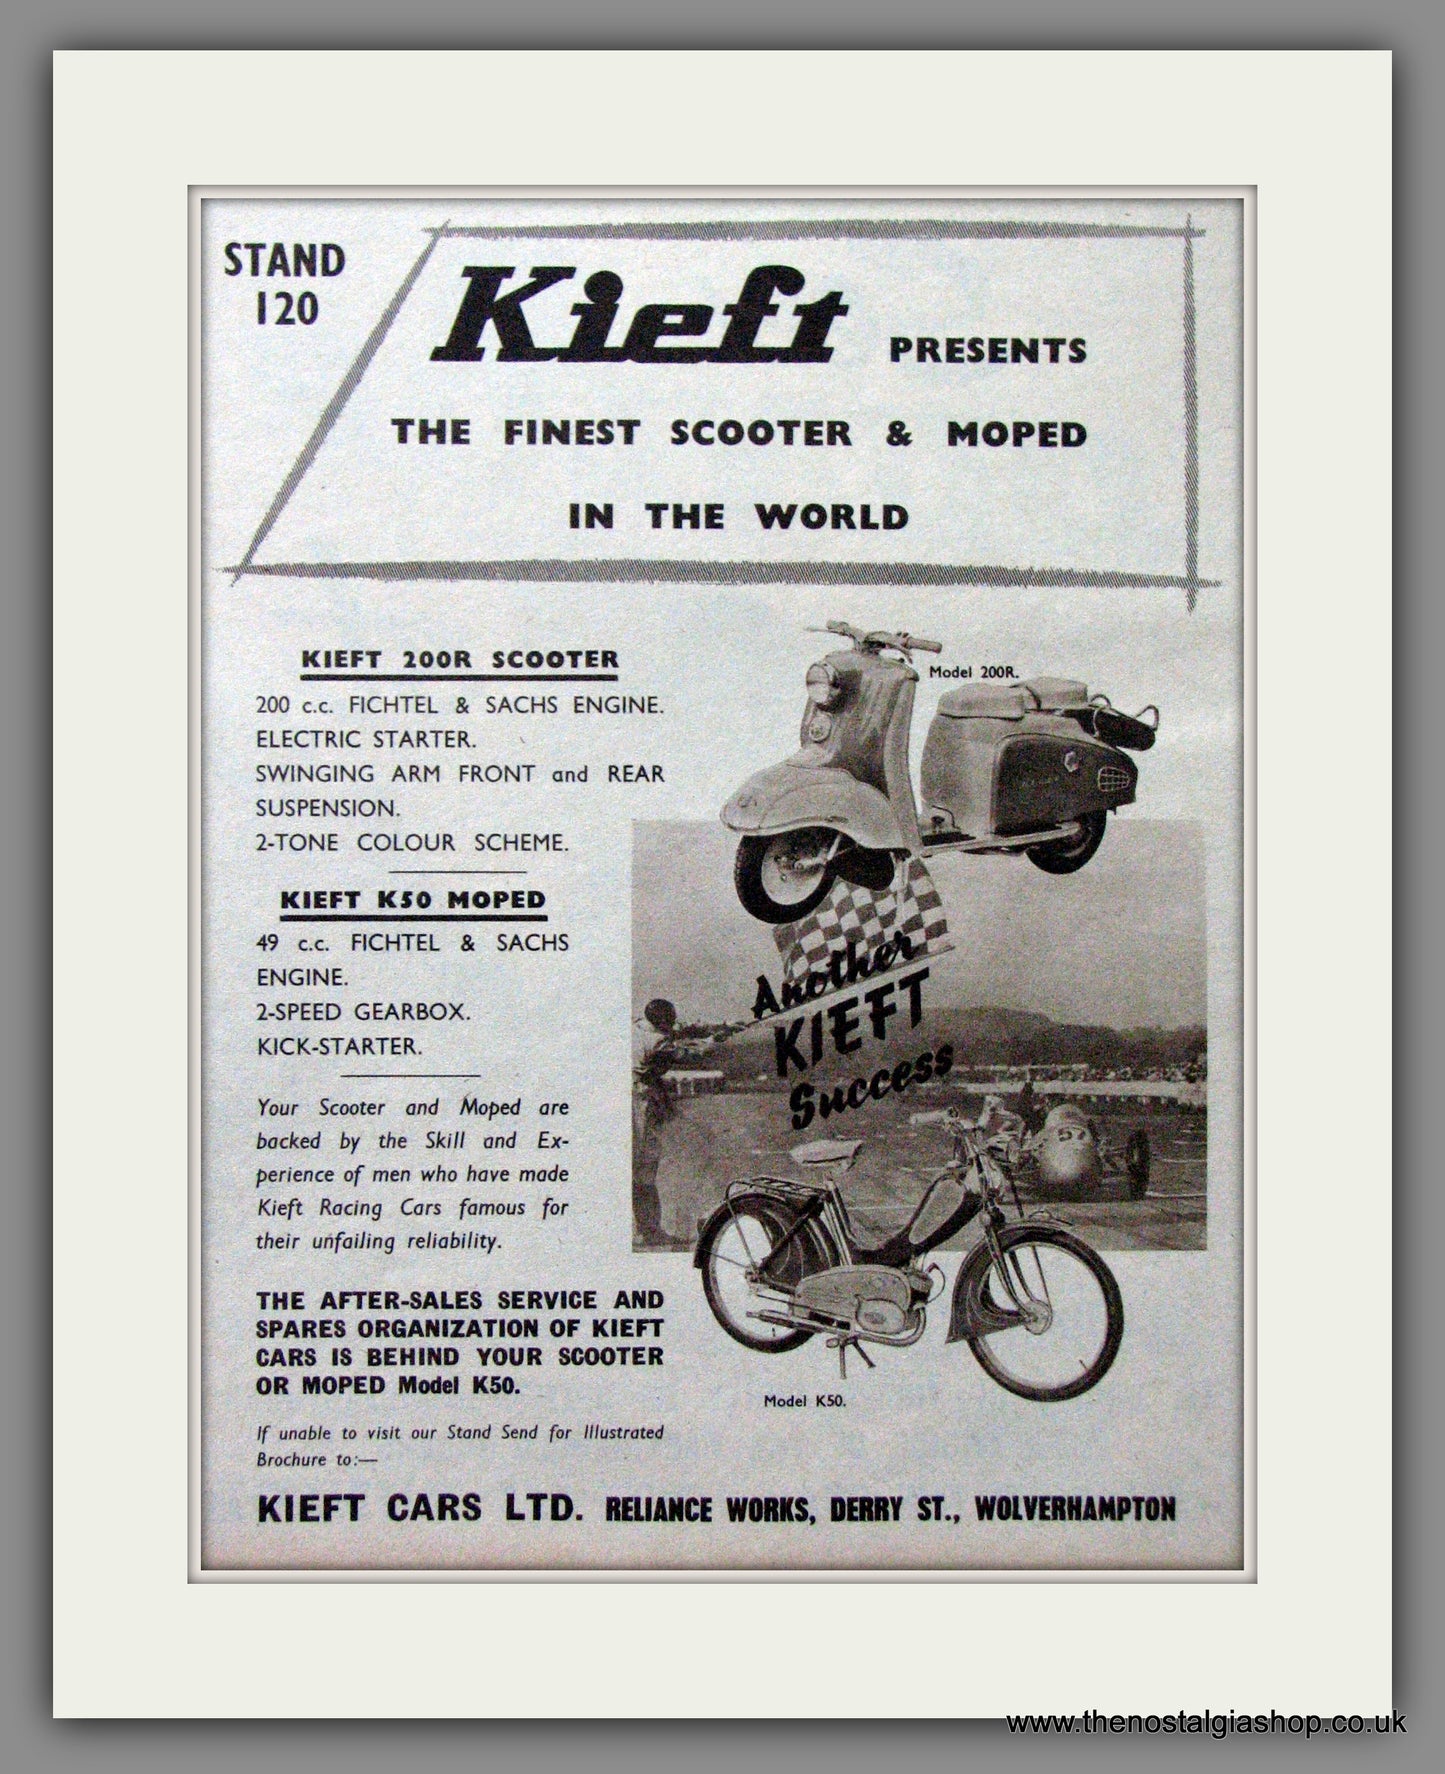 Kieft 200R Scooter and K50 Moped. Original Advert 1955 (ref AD54222)